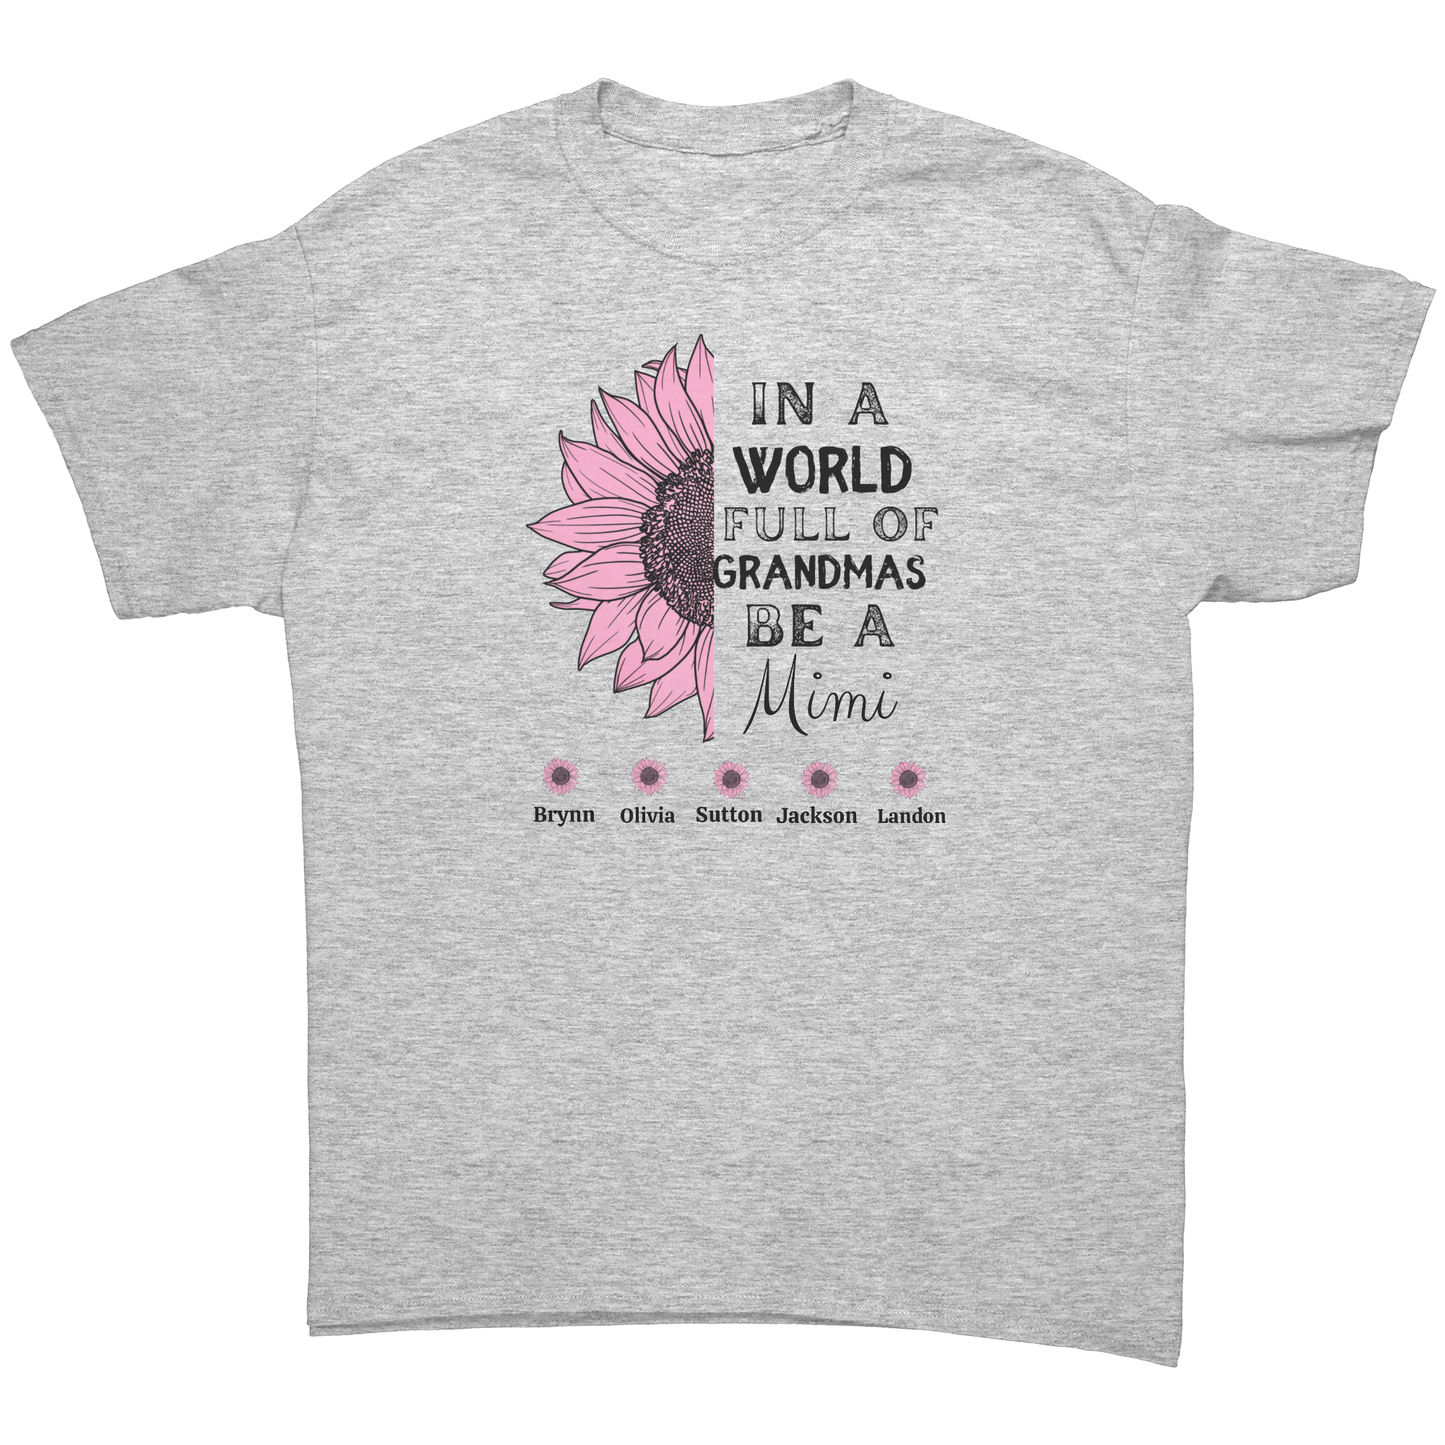 Get trendy with In a world full of Grandmas.... T shirt -  available at Good Gift Company. Grab yours for $10 today!